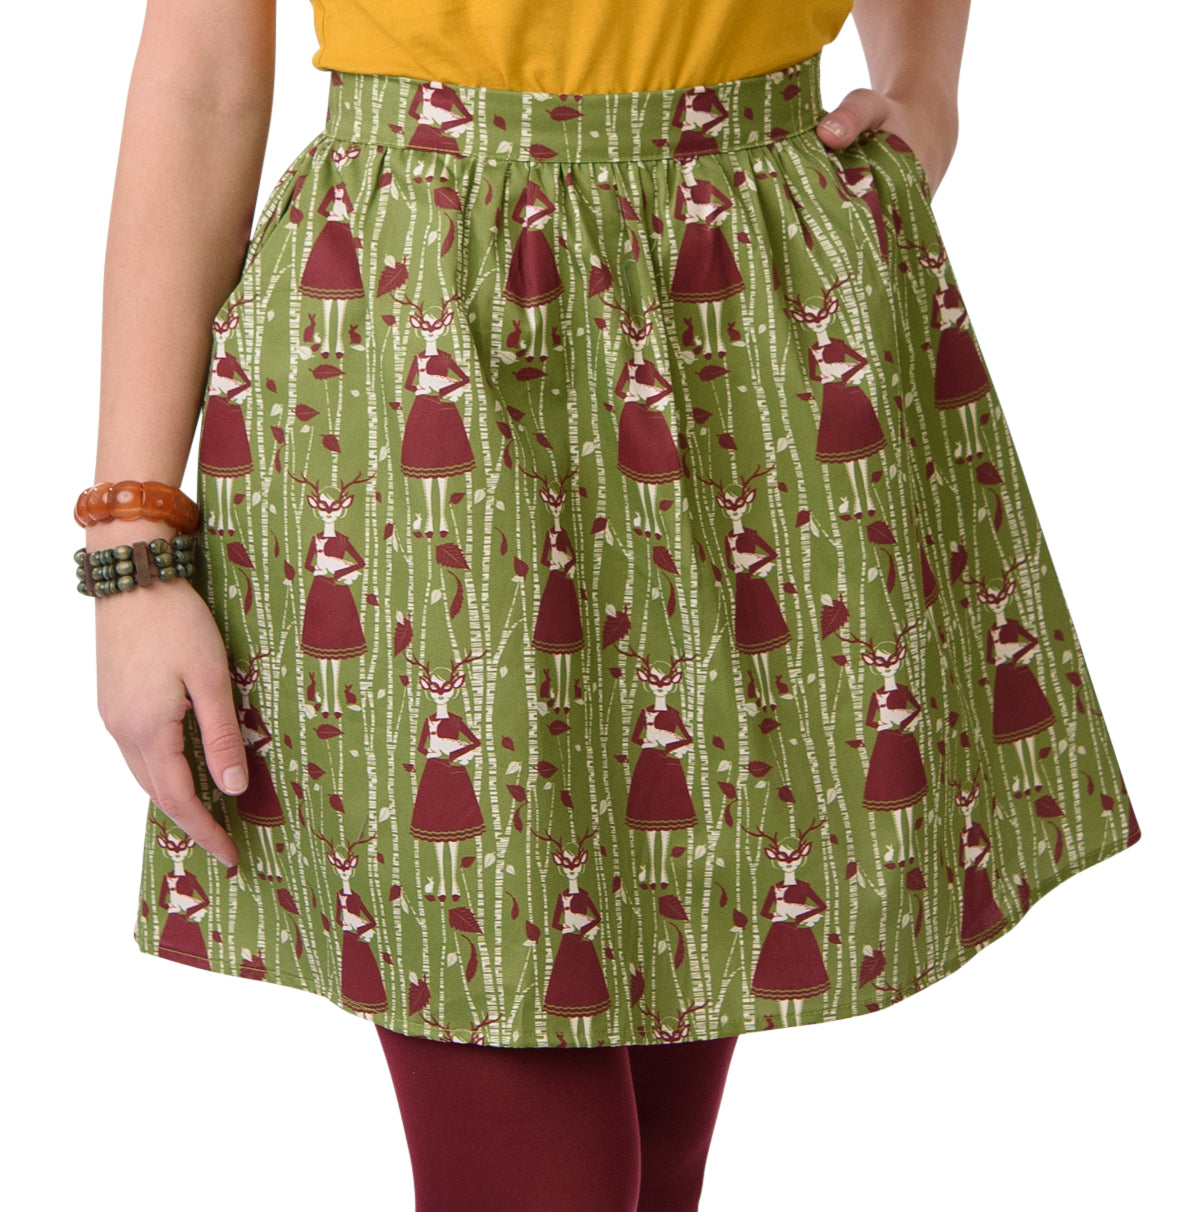 Gathered olive green and brown skirt with deer, birches and masked girl print and pockets